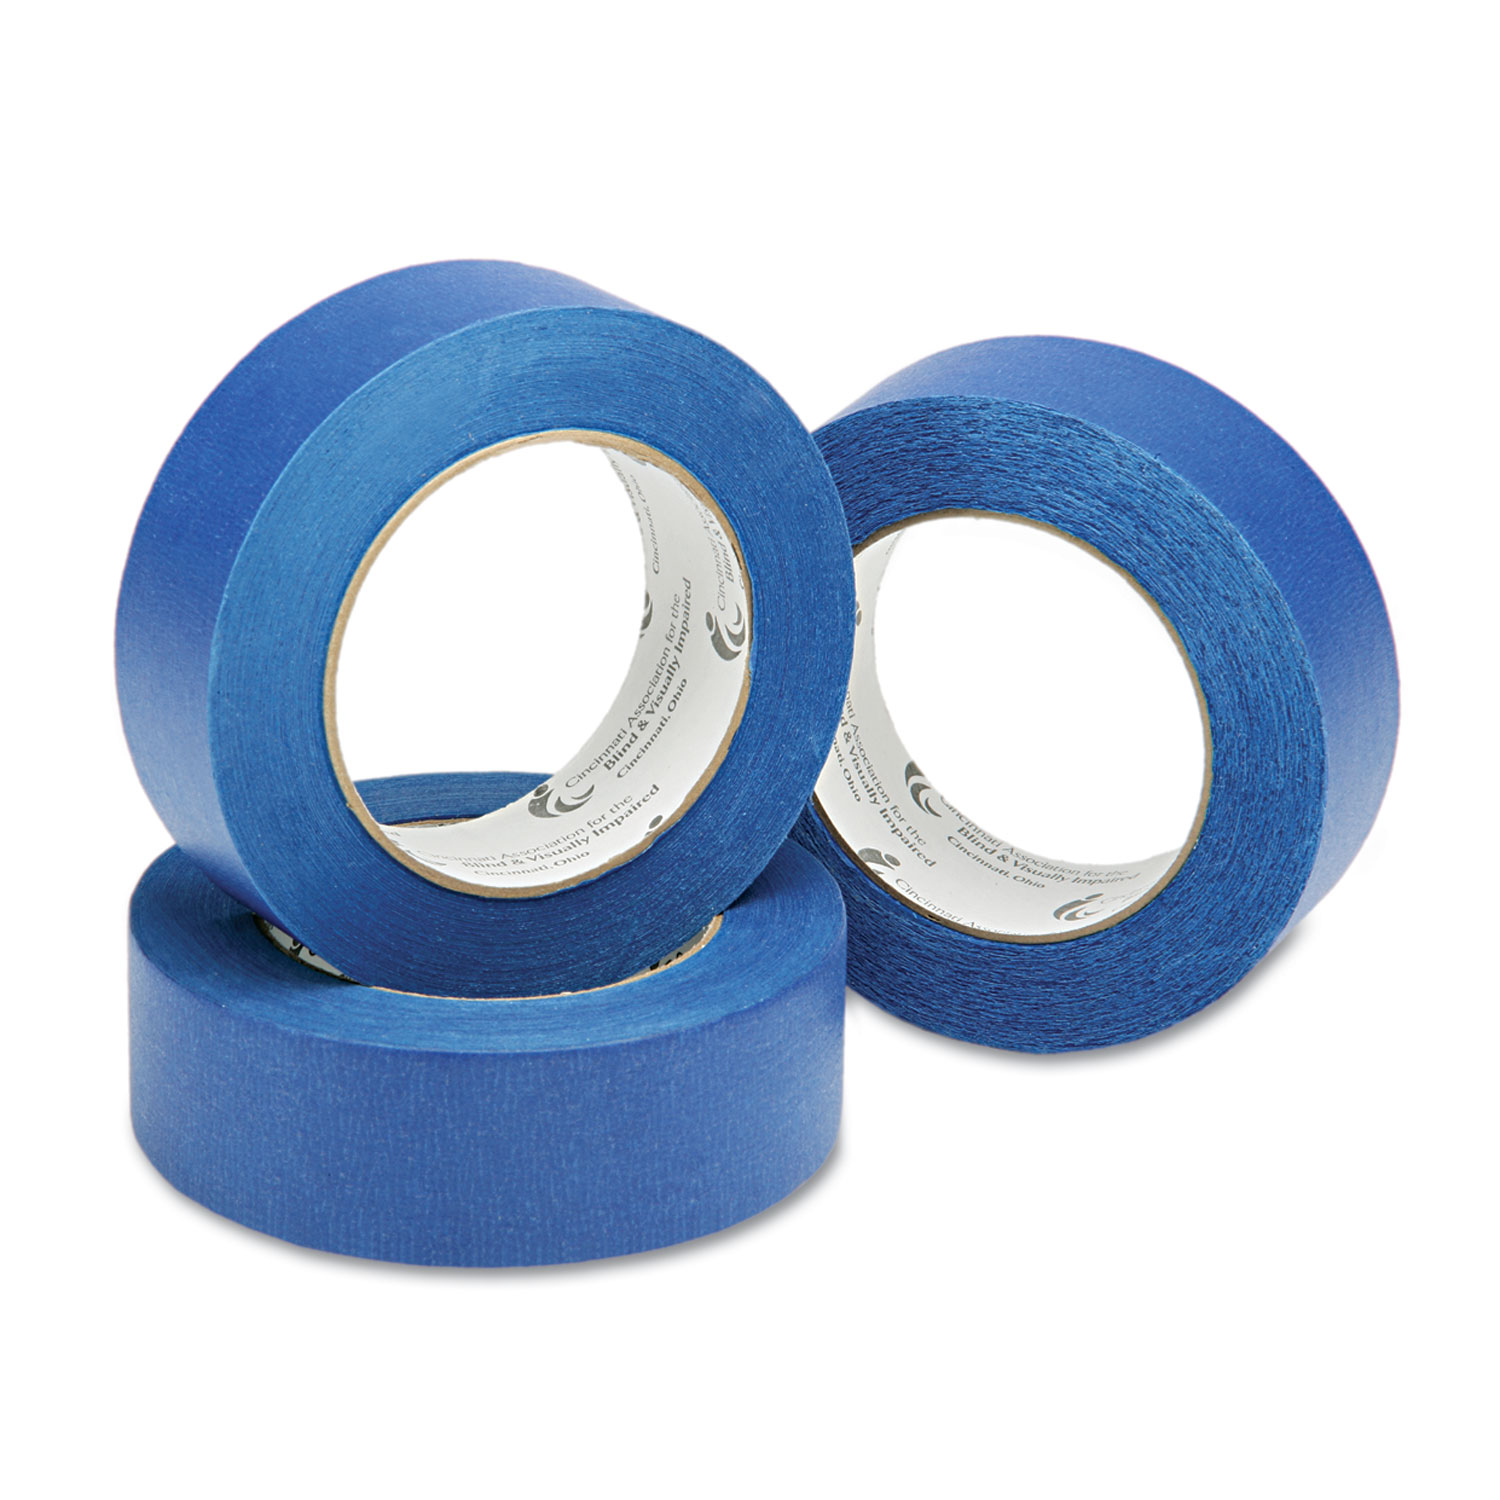 7510014567877 SKILCRAFT Painter's Tape, 3 Core, 1 x 60 yds, Blue -  Reliable Paper